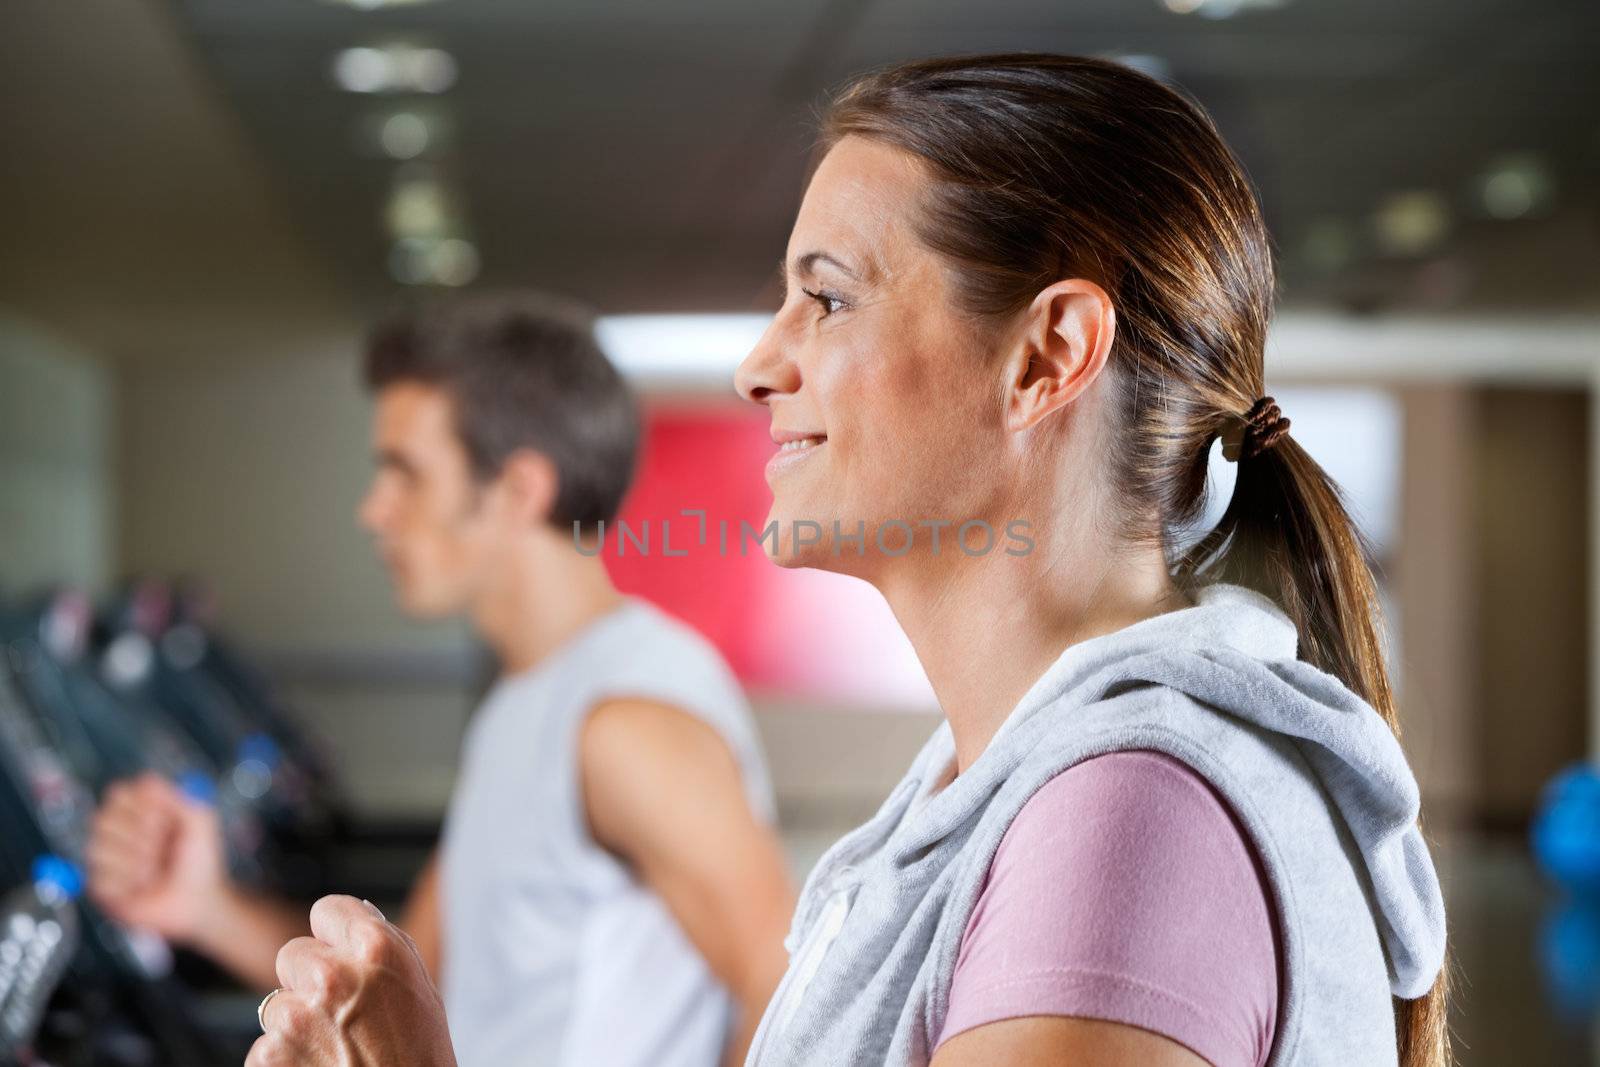 Side view of mature woman and man running on treadmill in health club